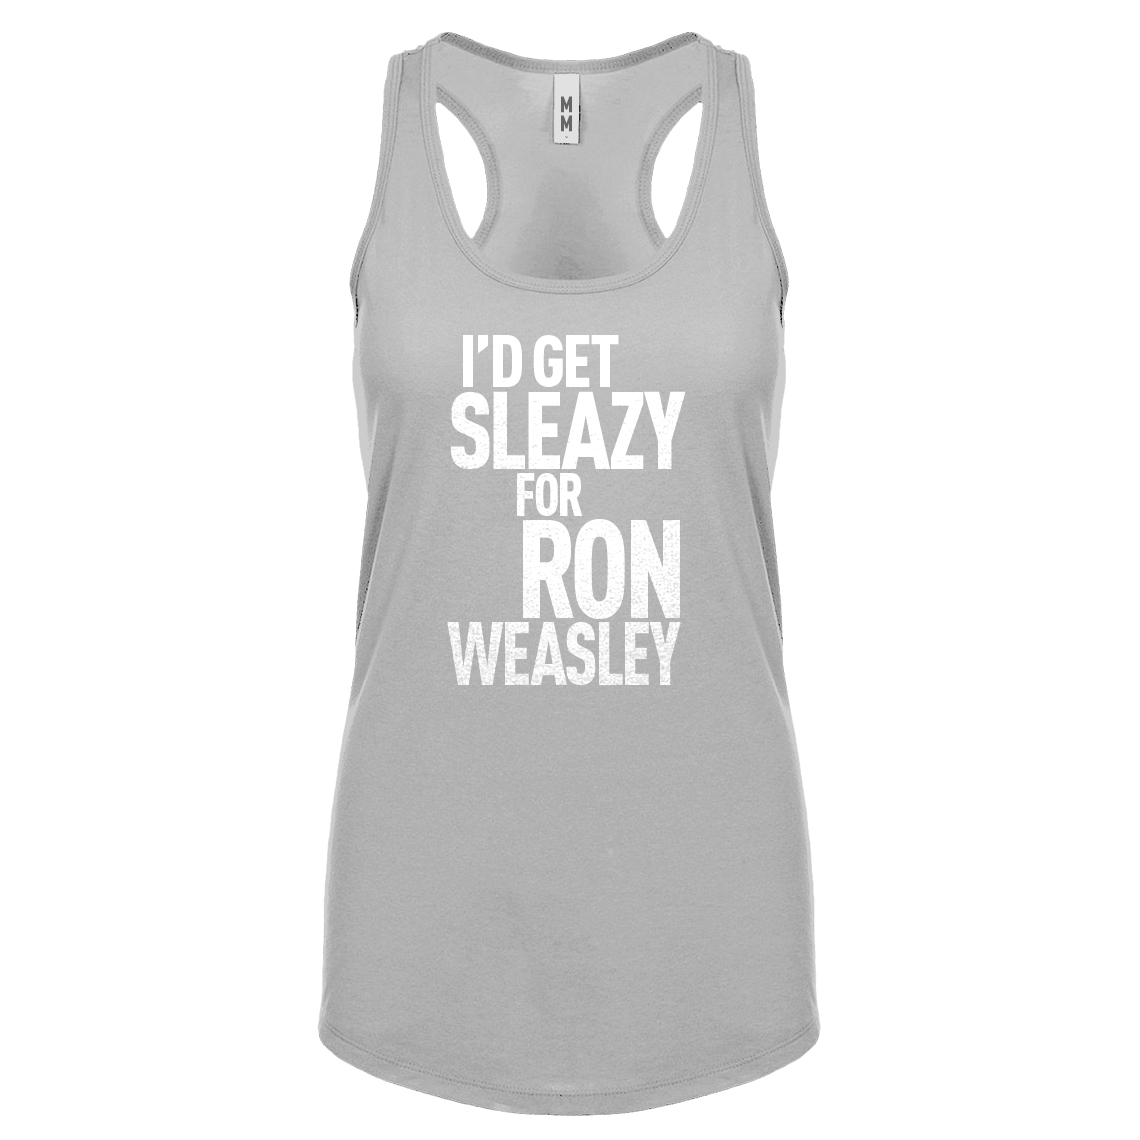 Womens Id Get Sleazy for Ron Weasely Racerback Tank Top #2006 